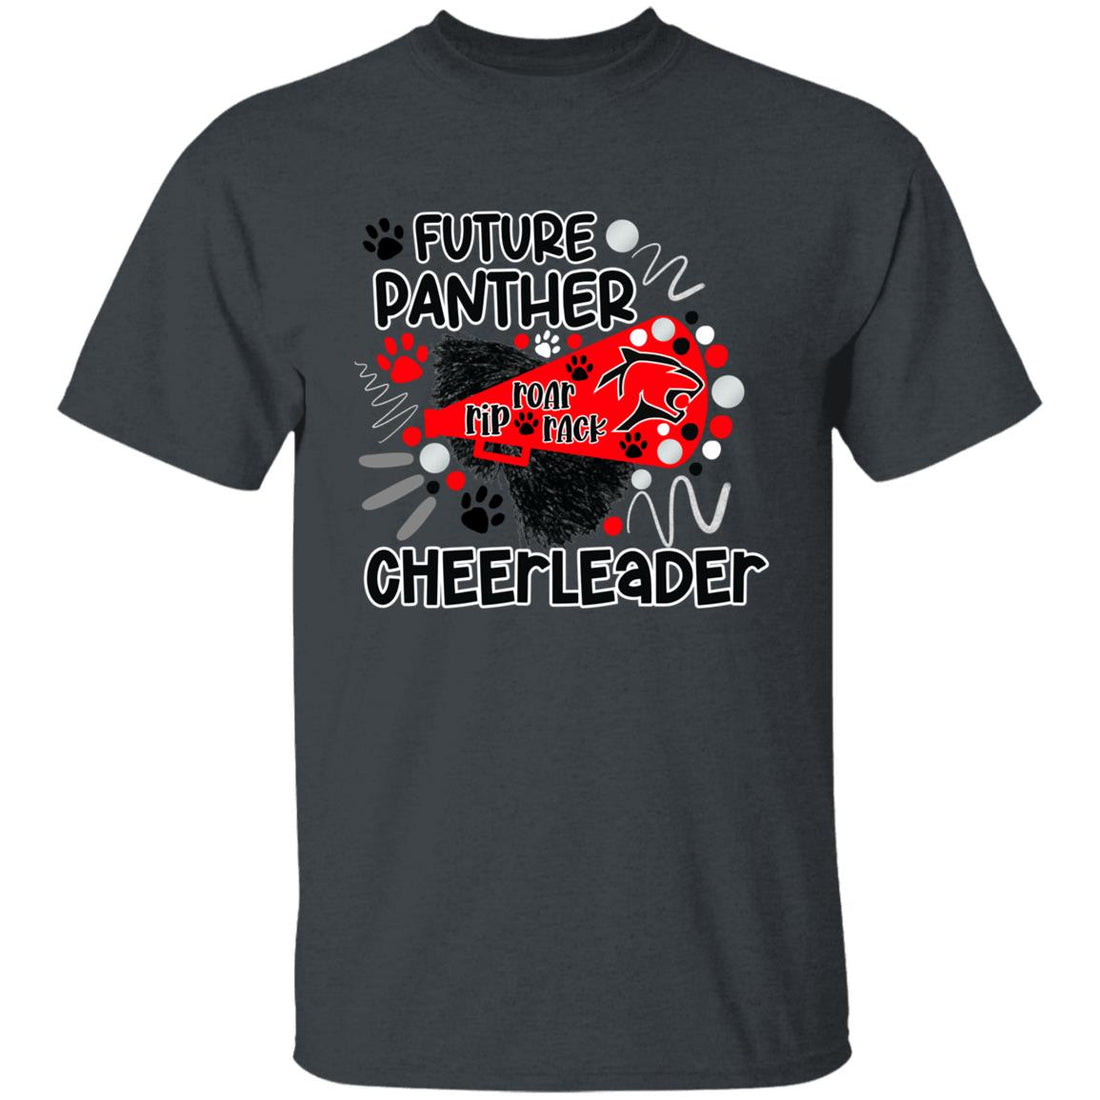 Future Panther Cheerleader Youth 5.3 oz 100% Cotton T-Shirt - T-Shirts - Positively Sassy - Future Panther Cheerleader Youth 5.3 oz 100% Cotton T-Shirt